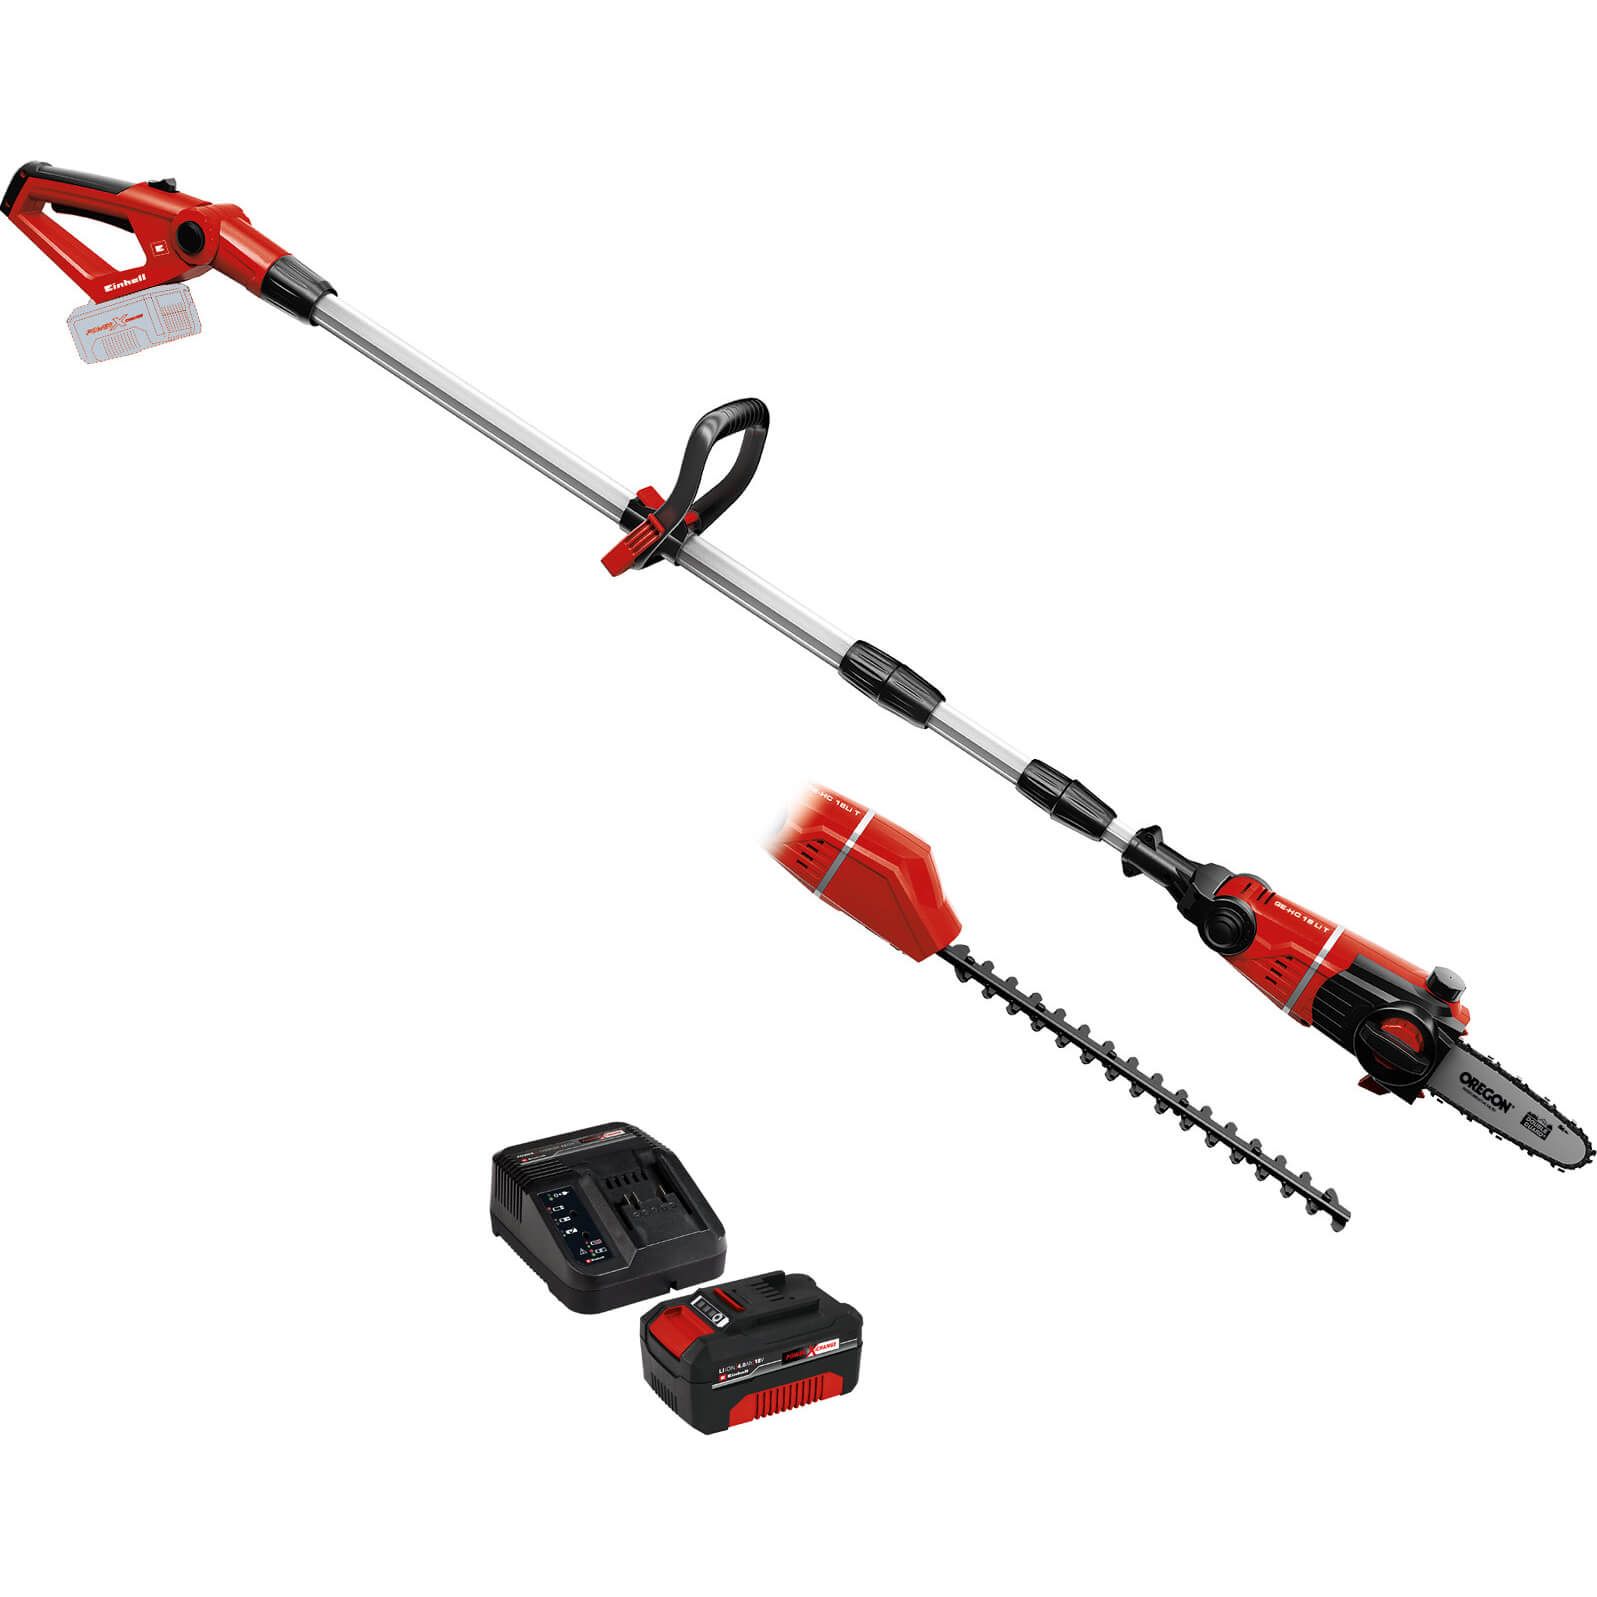 Einhell GE-HC 18 Li T 18v Cordless Telescopic Pole Pruner and Hedge Trimmer 1 x 4ah Li-ion Charger